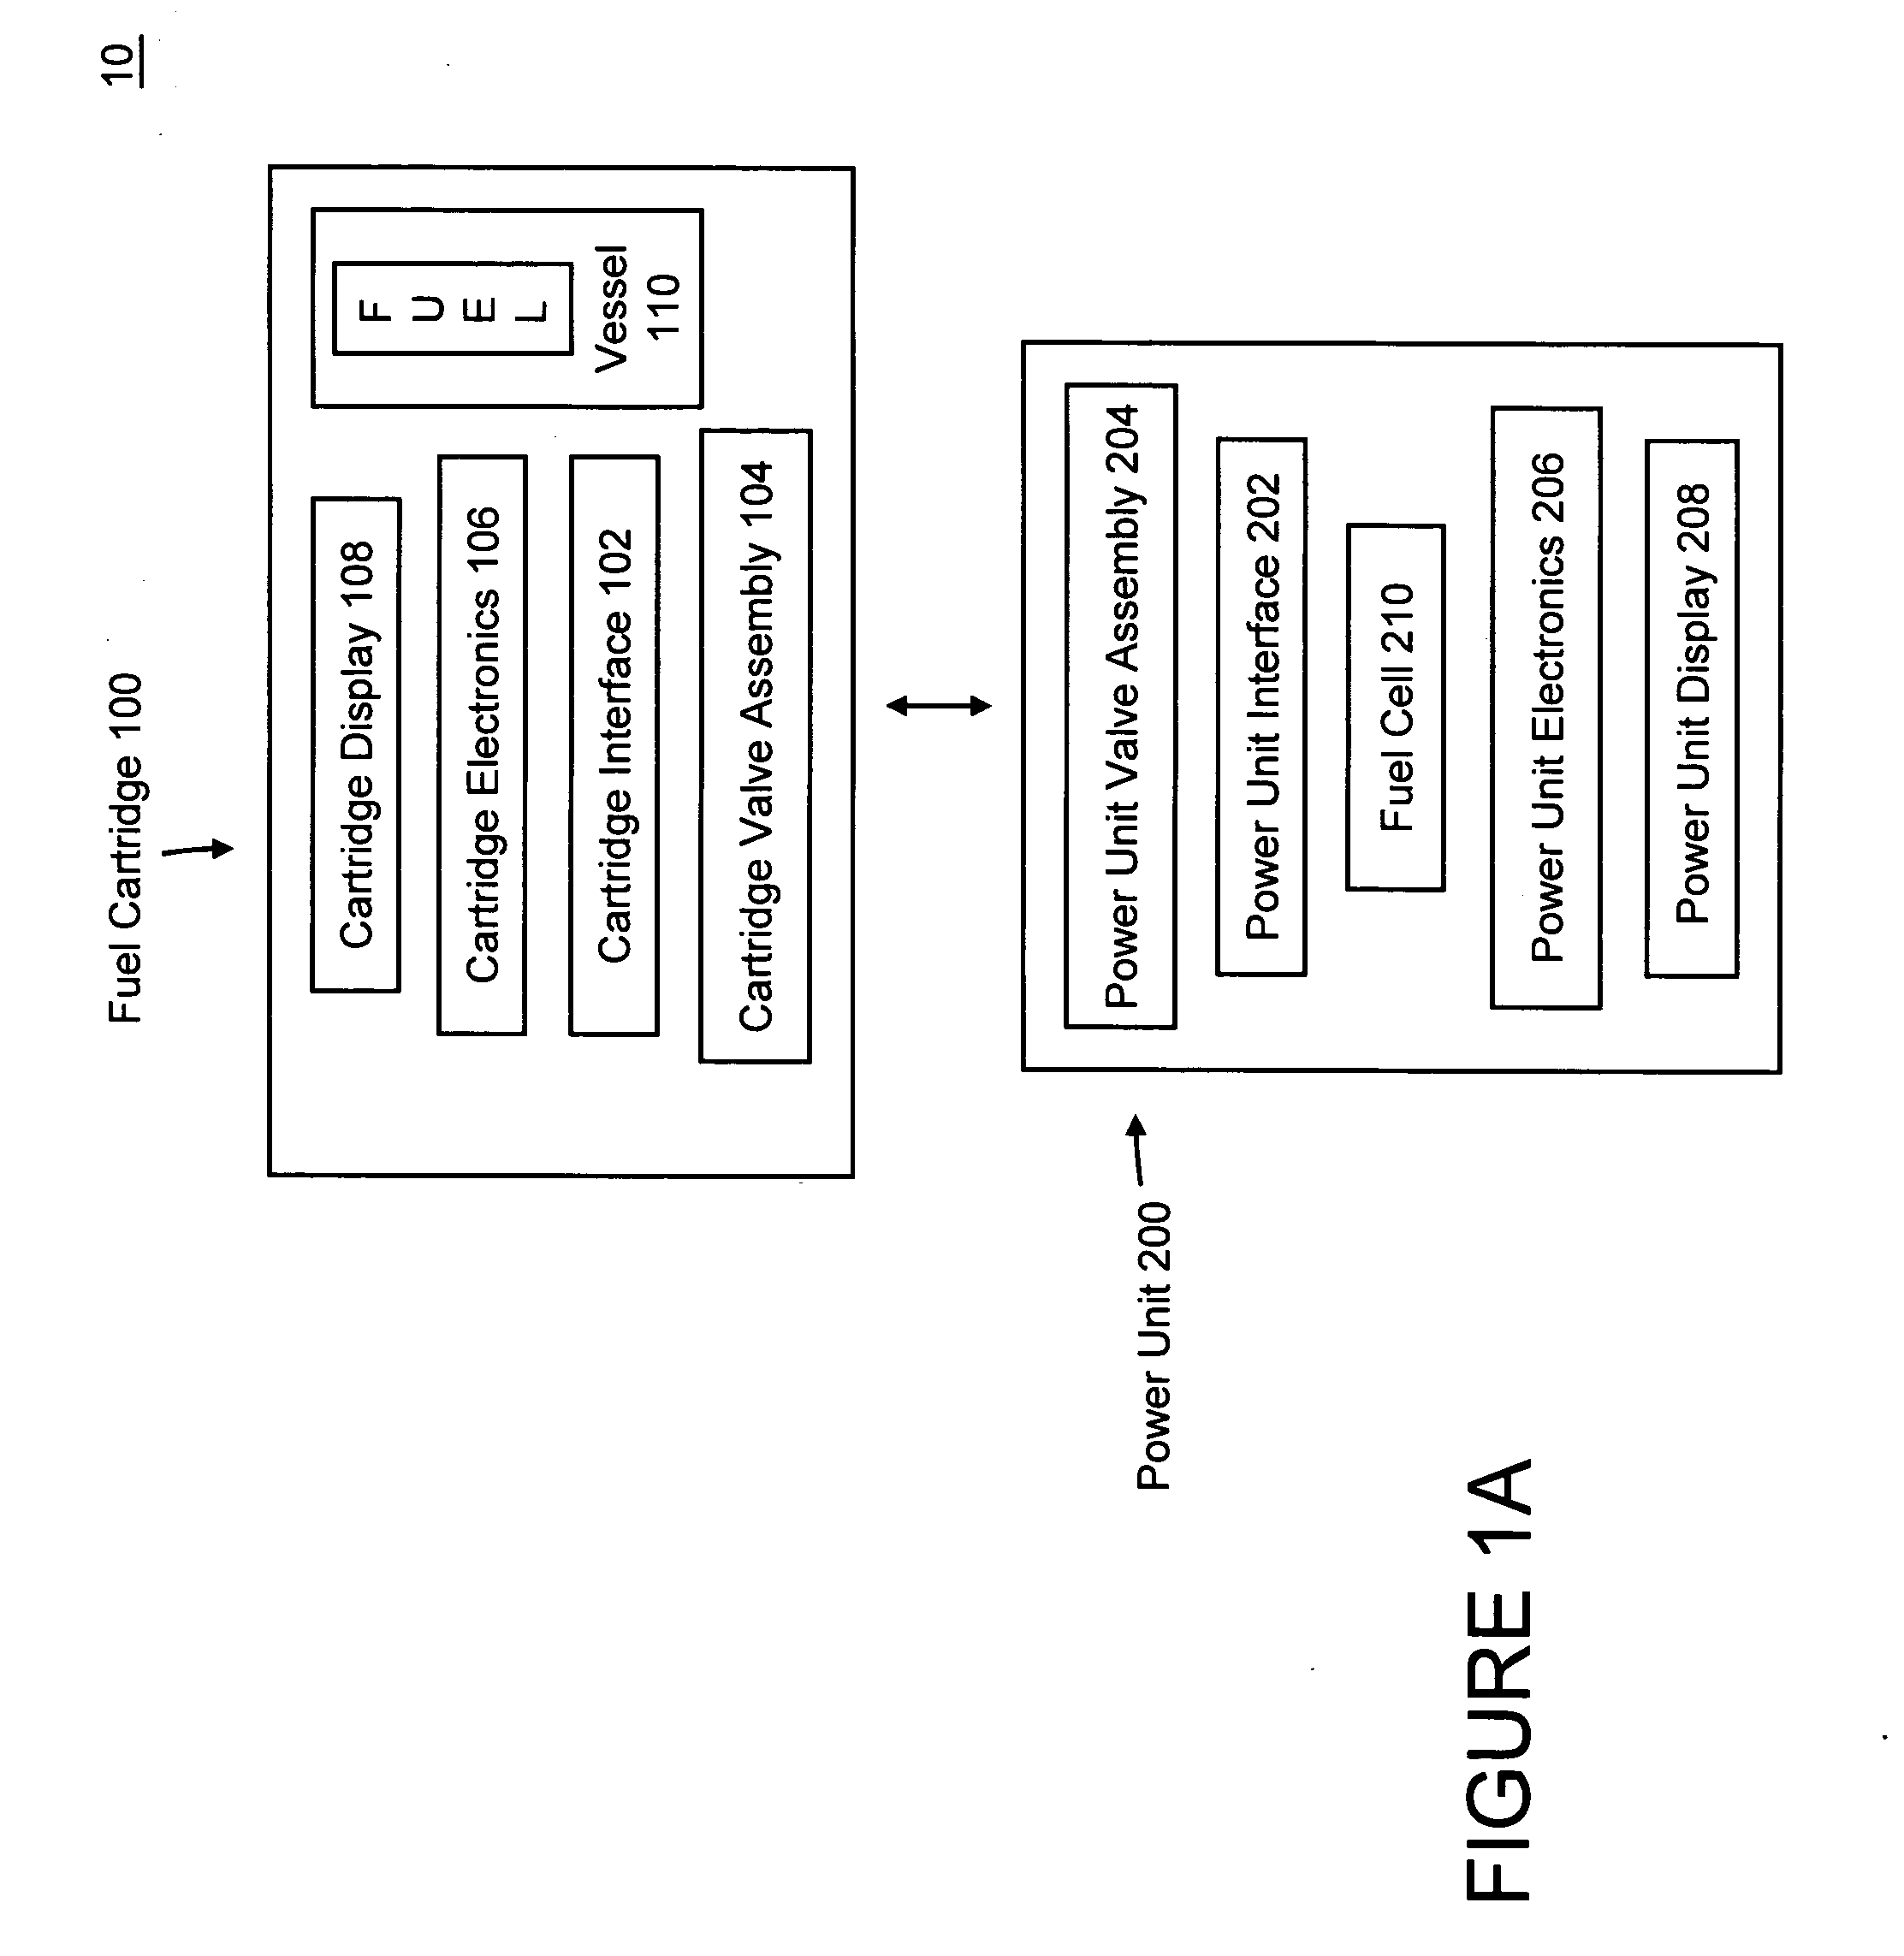 Fuel cell power and management system, and technique for controlling and/or operating same